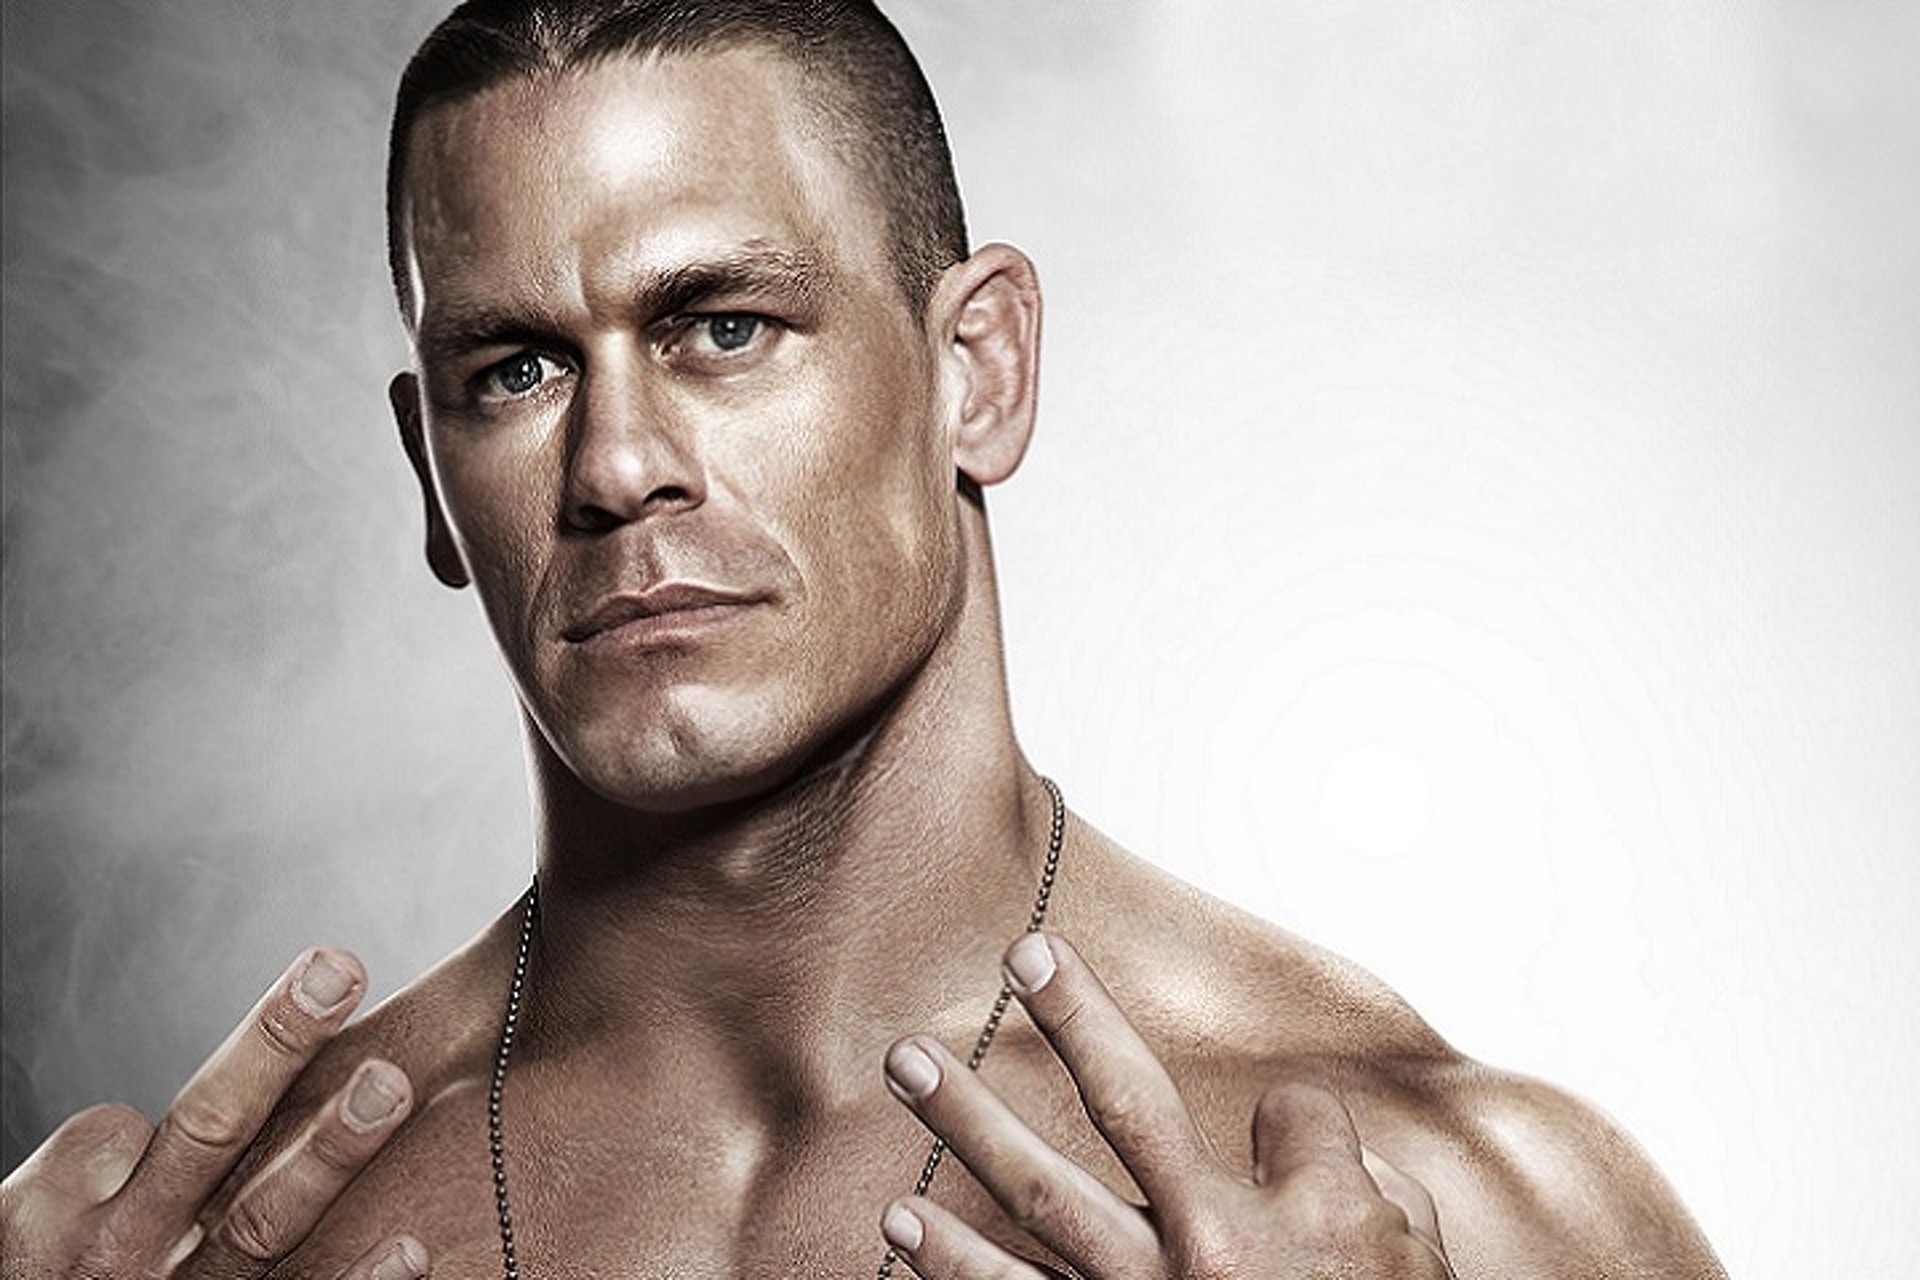 1920x1280 John Cena is a Muscle Car Muscle Man product 2015-07-09 08:00:43